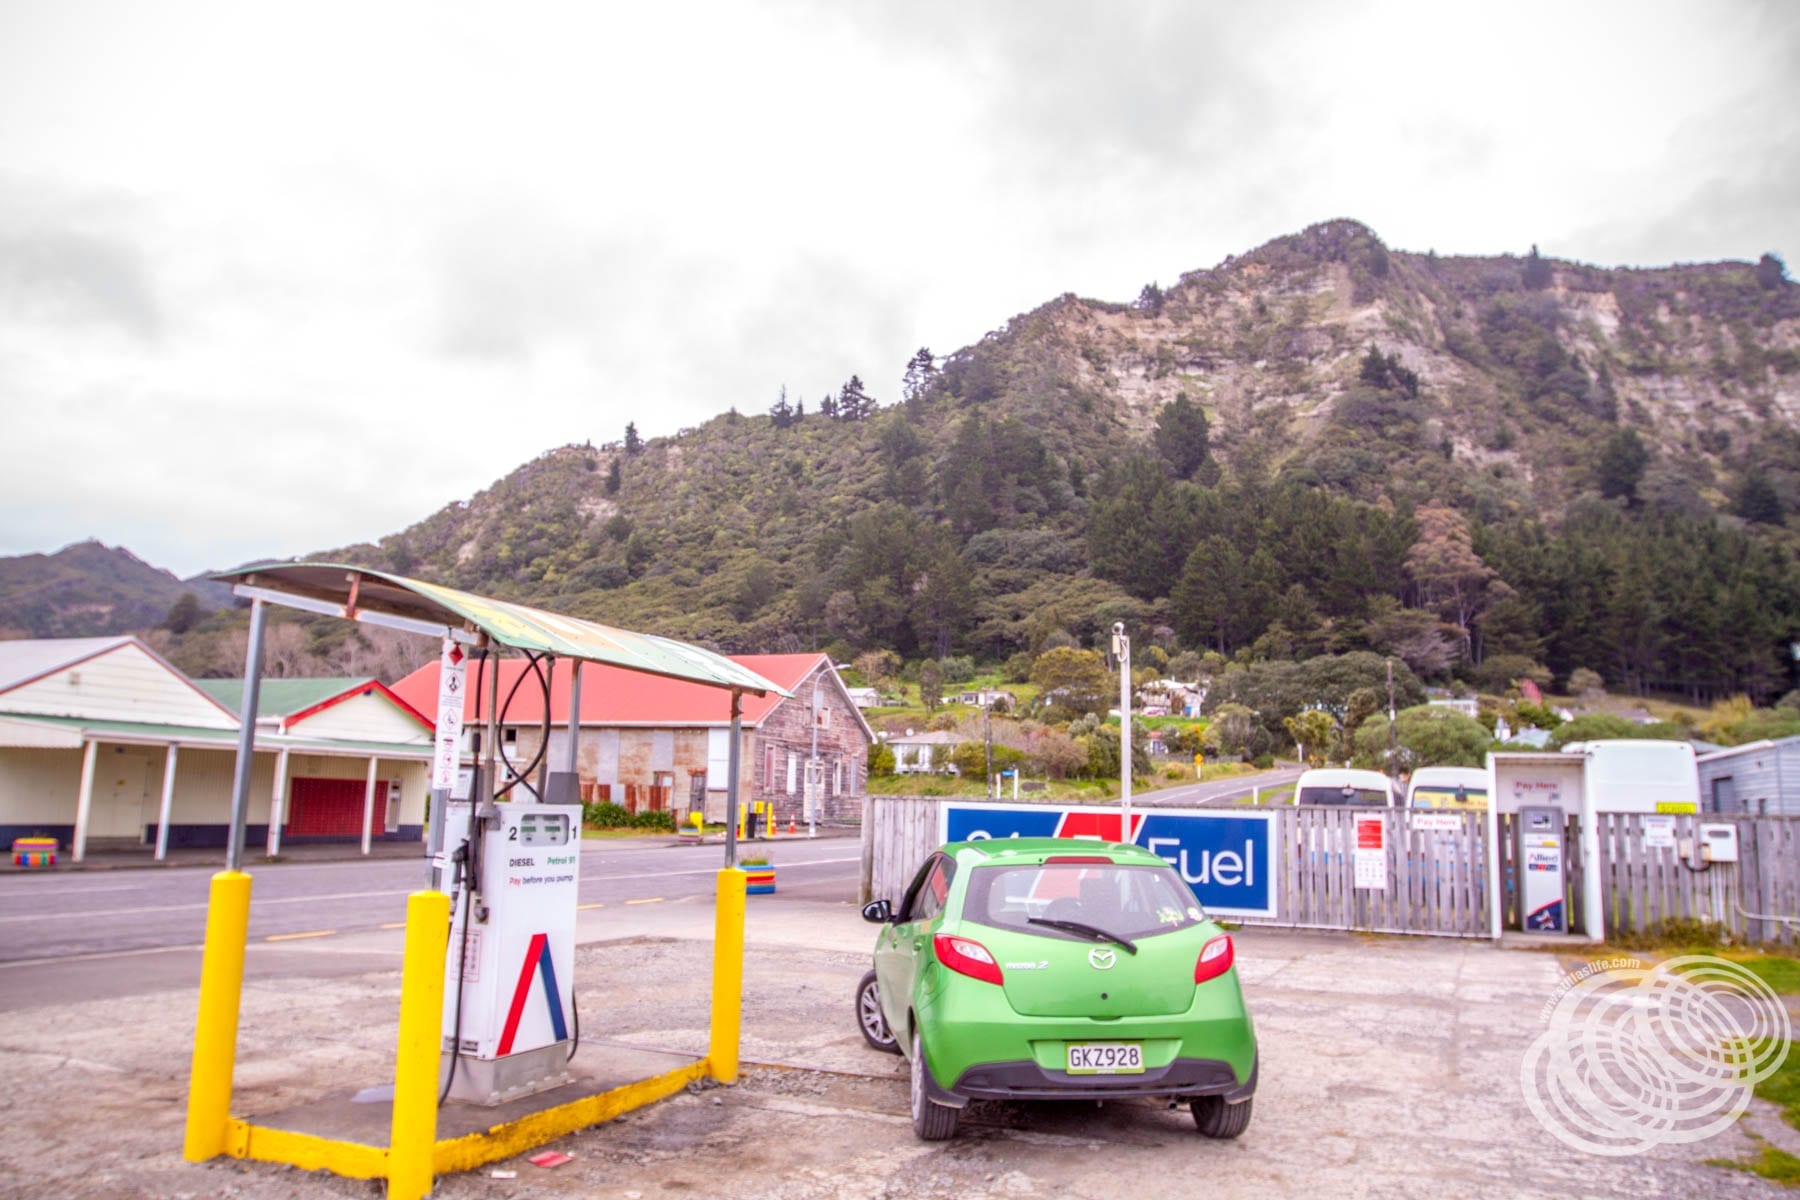 Our economical little Mazda 2 at the unmanned Allied service station in Te Araroa